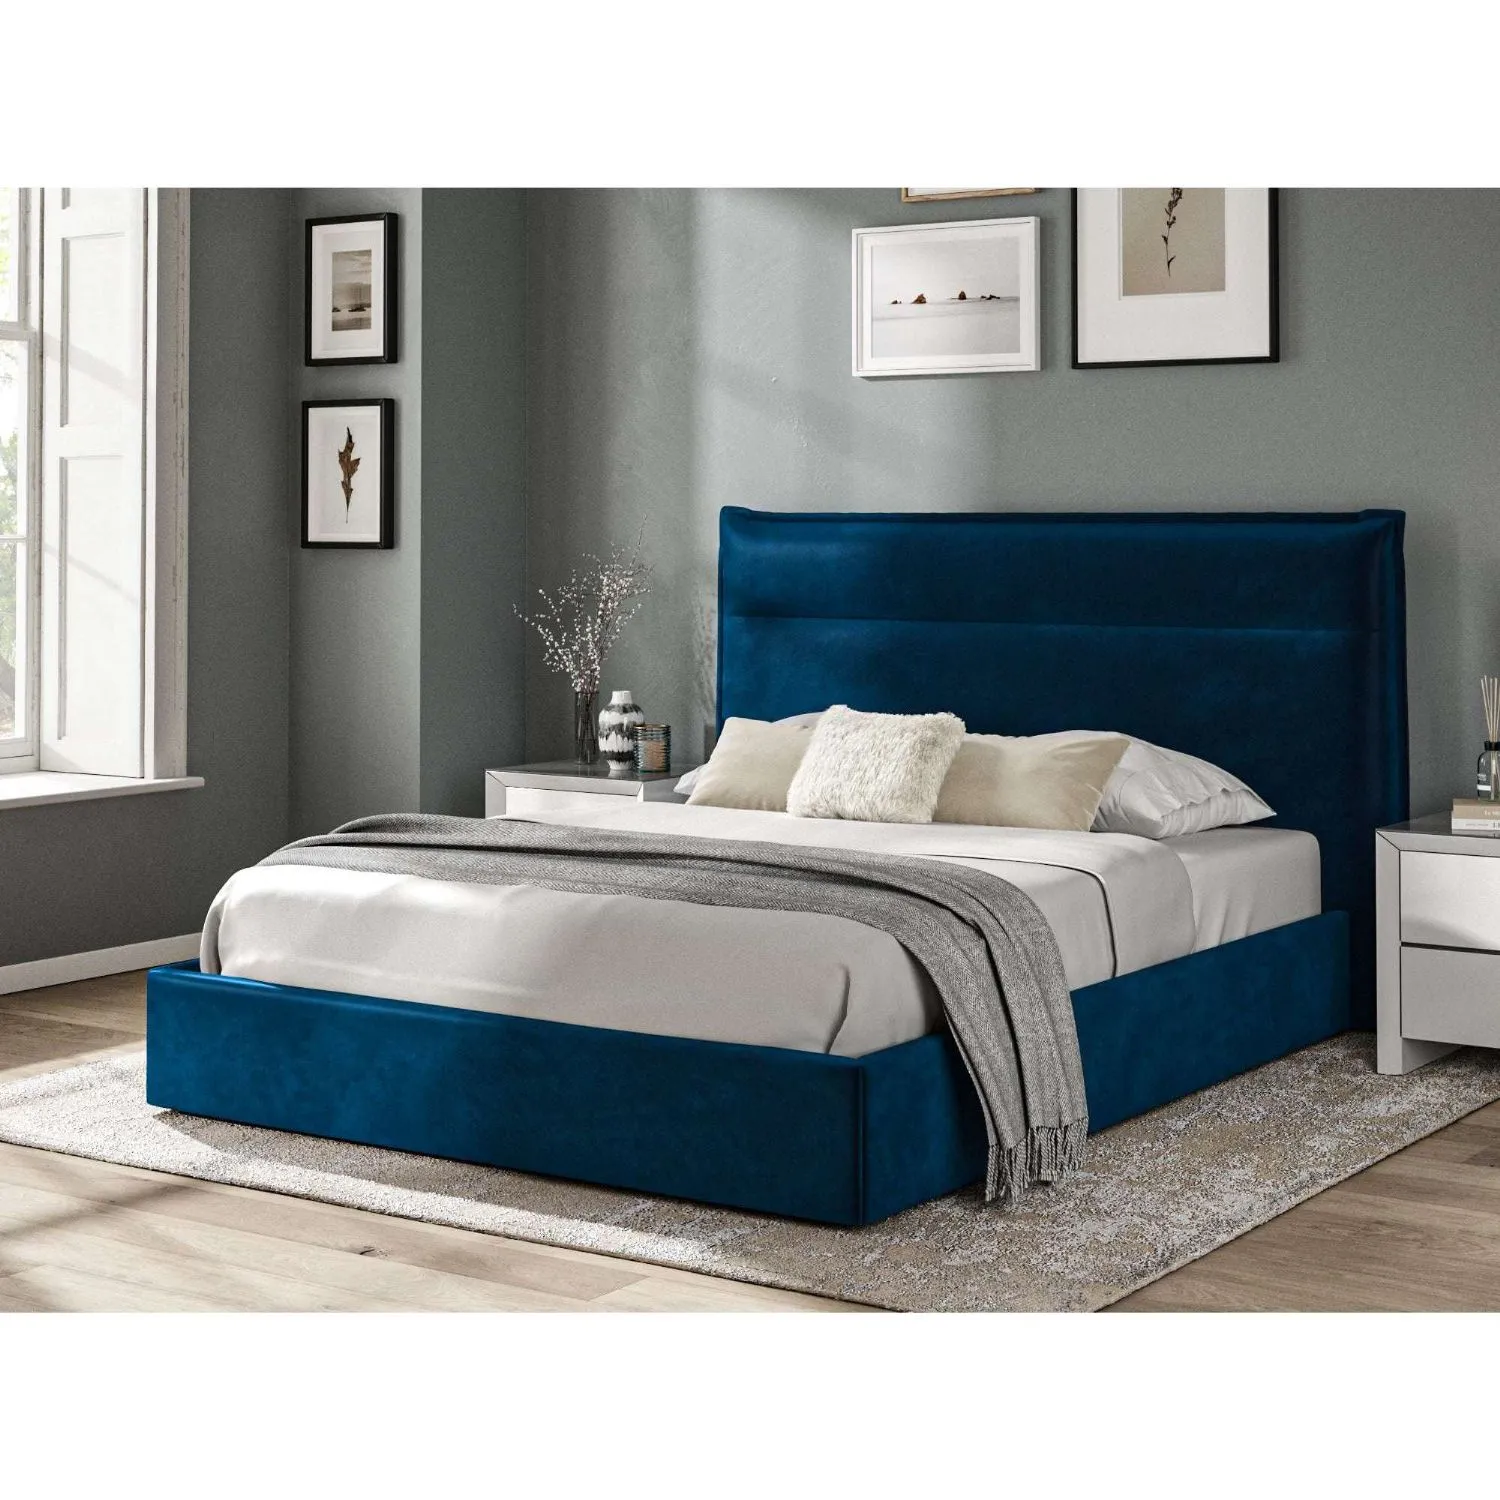 Fabric Bed Collection Blue 4